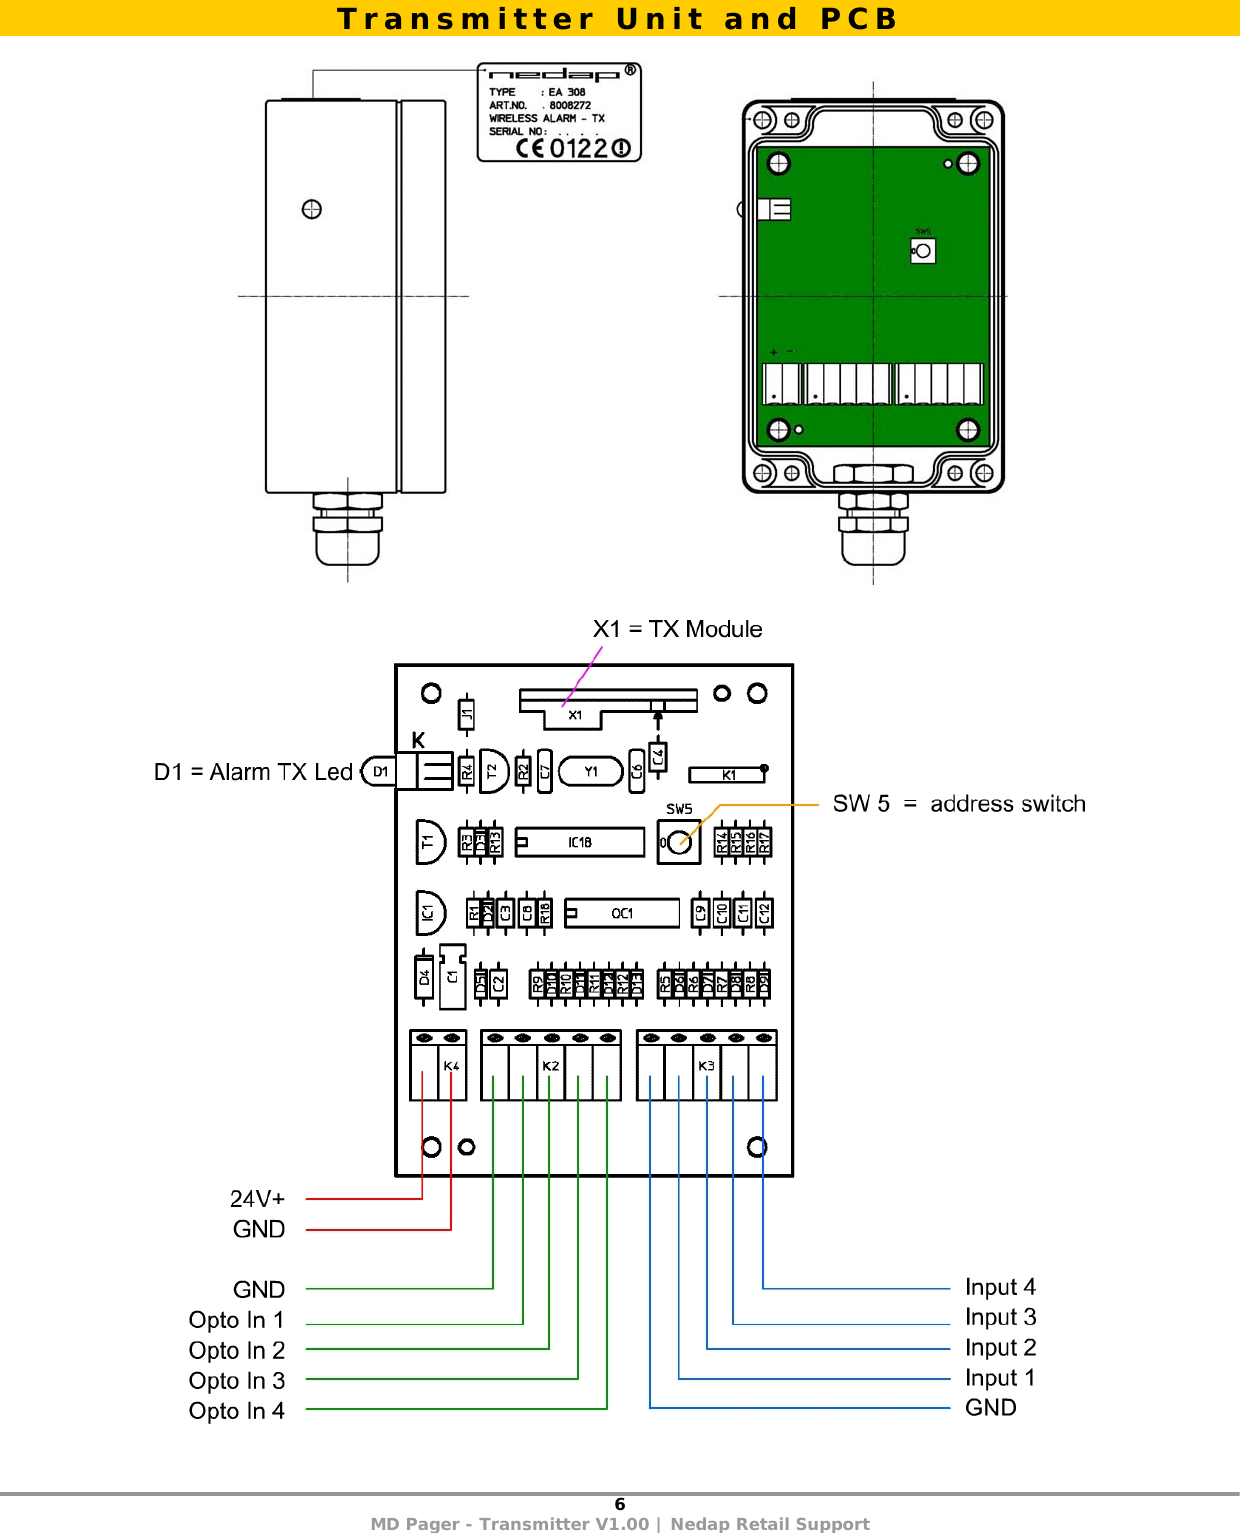 6 MD Pager - Transmitter V1.00 | Nedap Retail Support      Transmitter Unit and PCB 